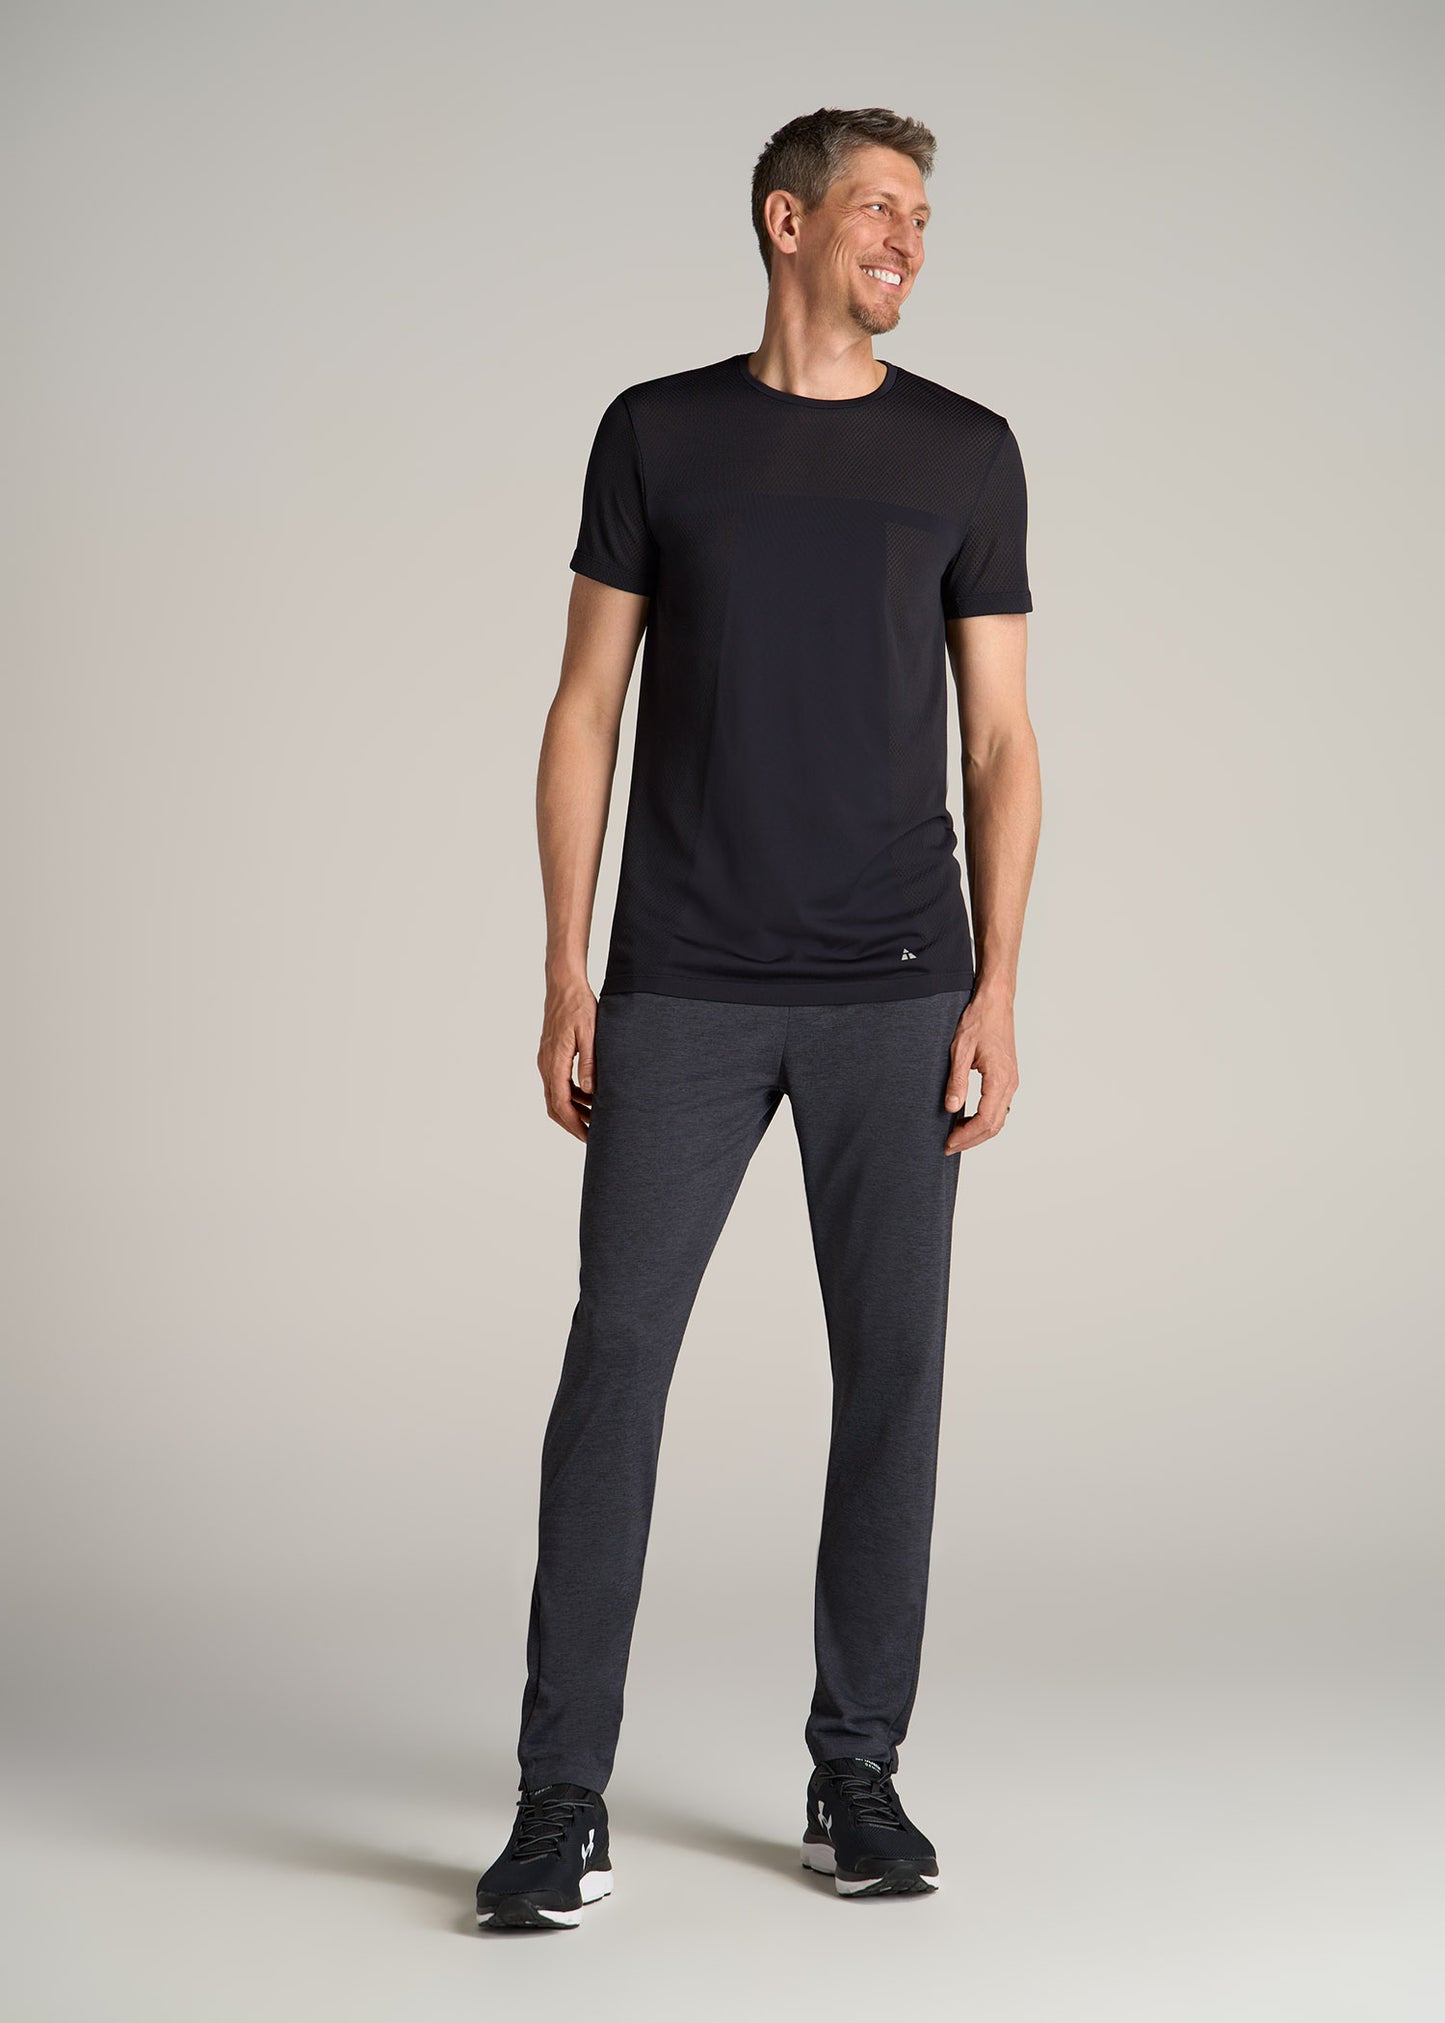 AT Performance Engineered Athletic Tall Tee in Black